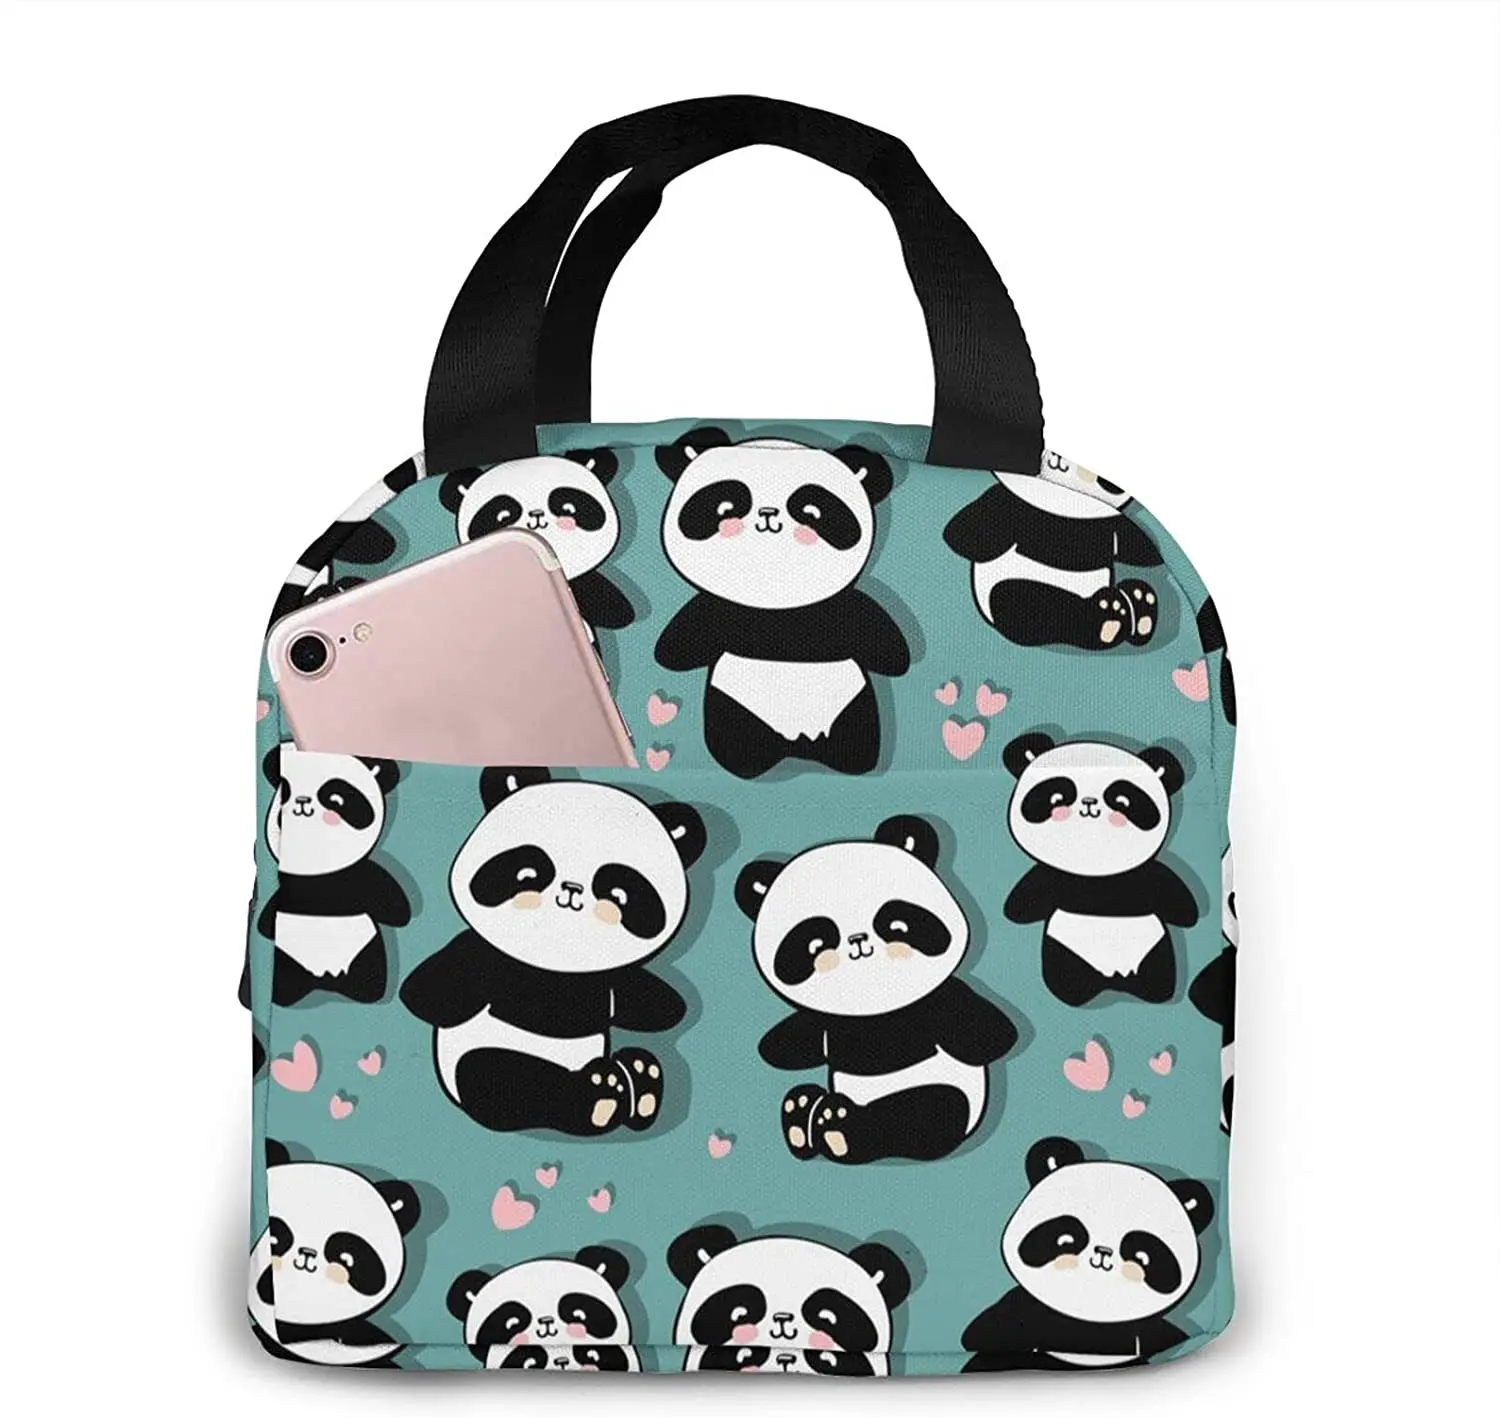 Cute Panda Lunch Box Insulated Cooler Lunch Bag for Men Women Girls Boys Teens Lunchbox Tote Small for Work Picnic Office